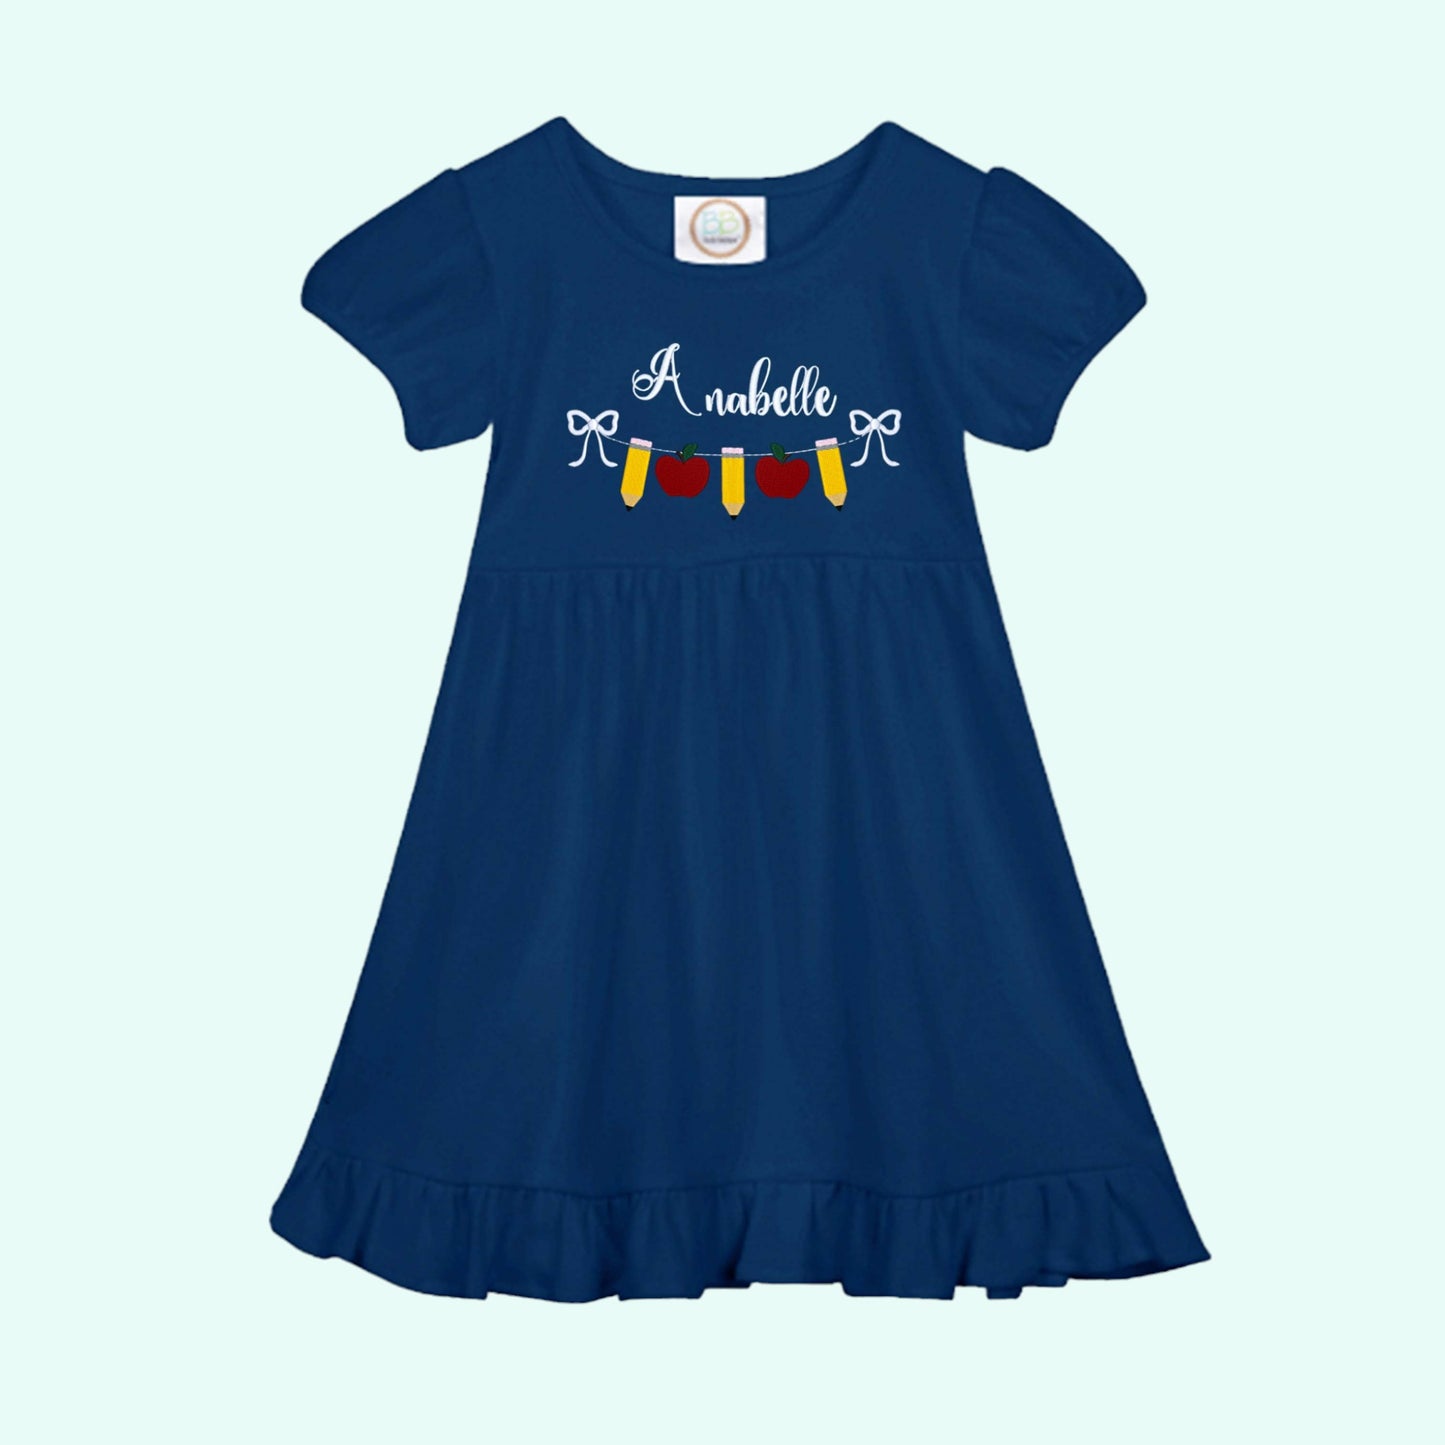 Back to School Personalized Dress, Girls Pencil School dress,  Apple school outfits, Personalized Girls back to school dress,  School Dress